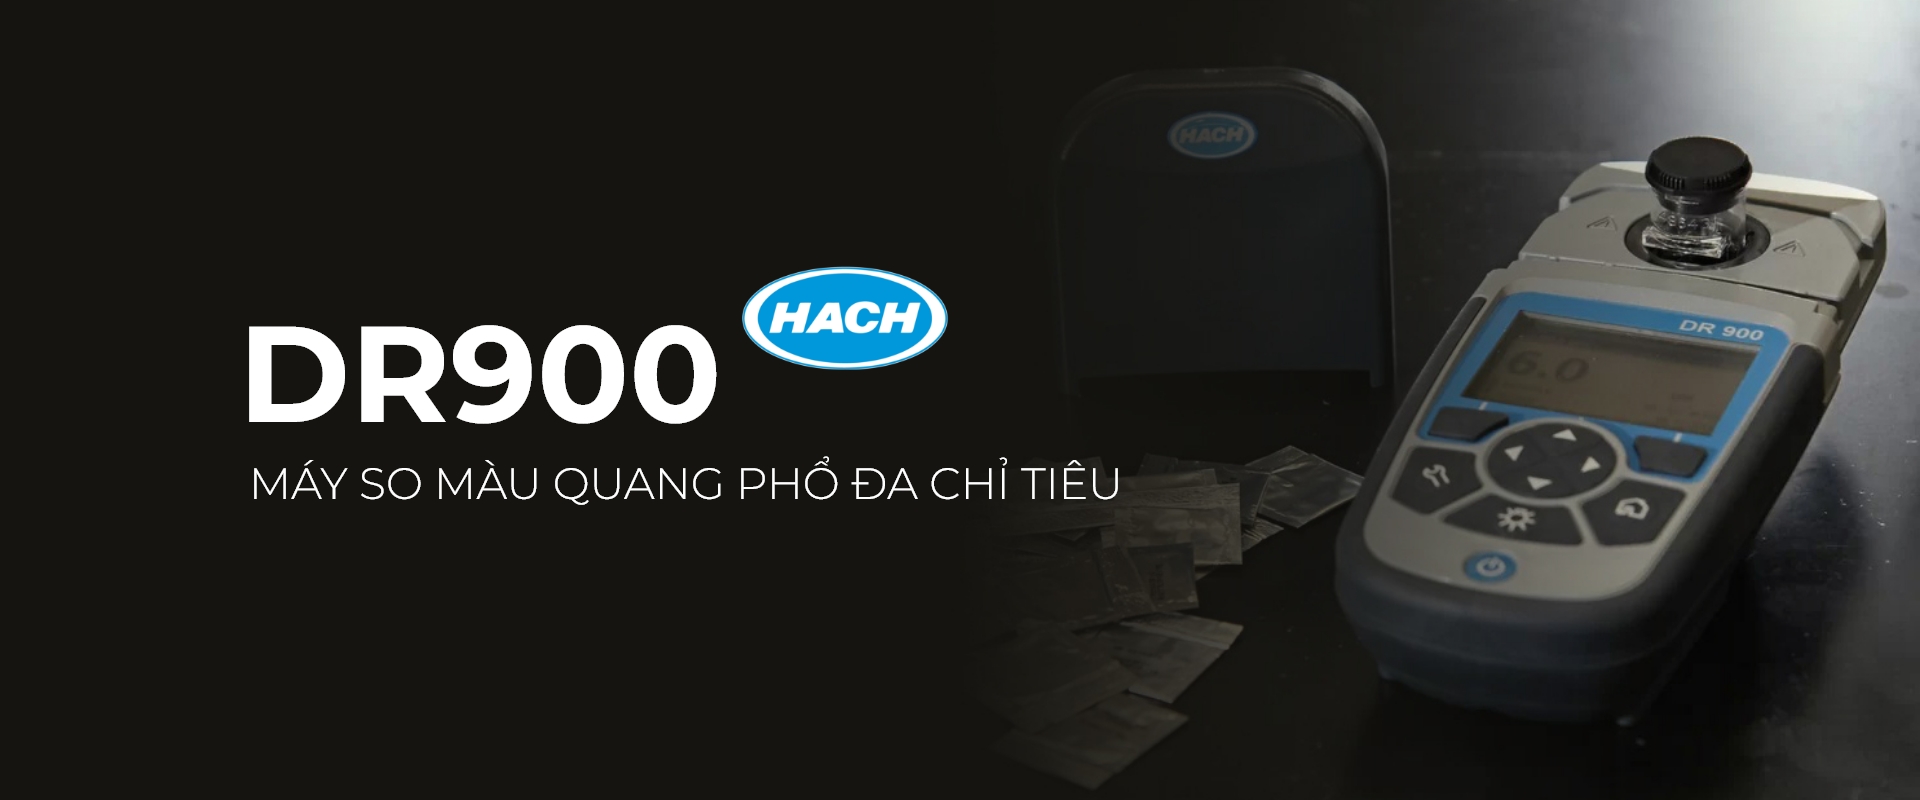 HACH DR900 banner 1 - Thắng Lợi Victory